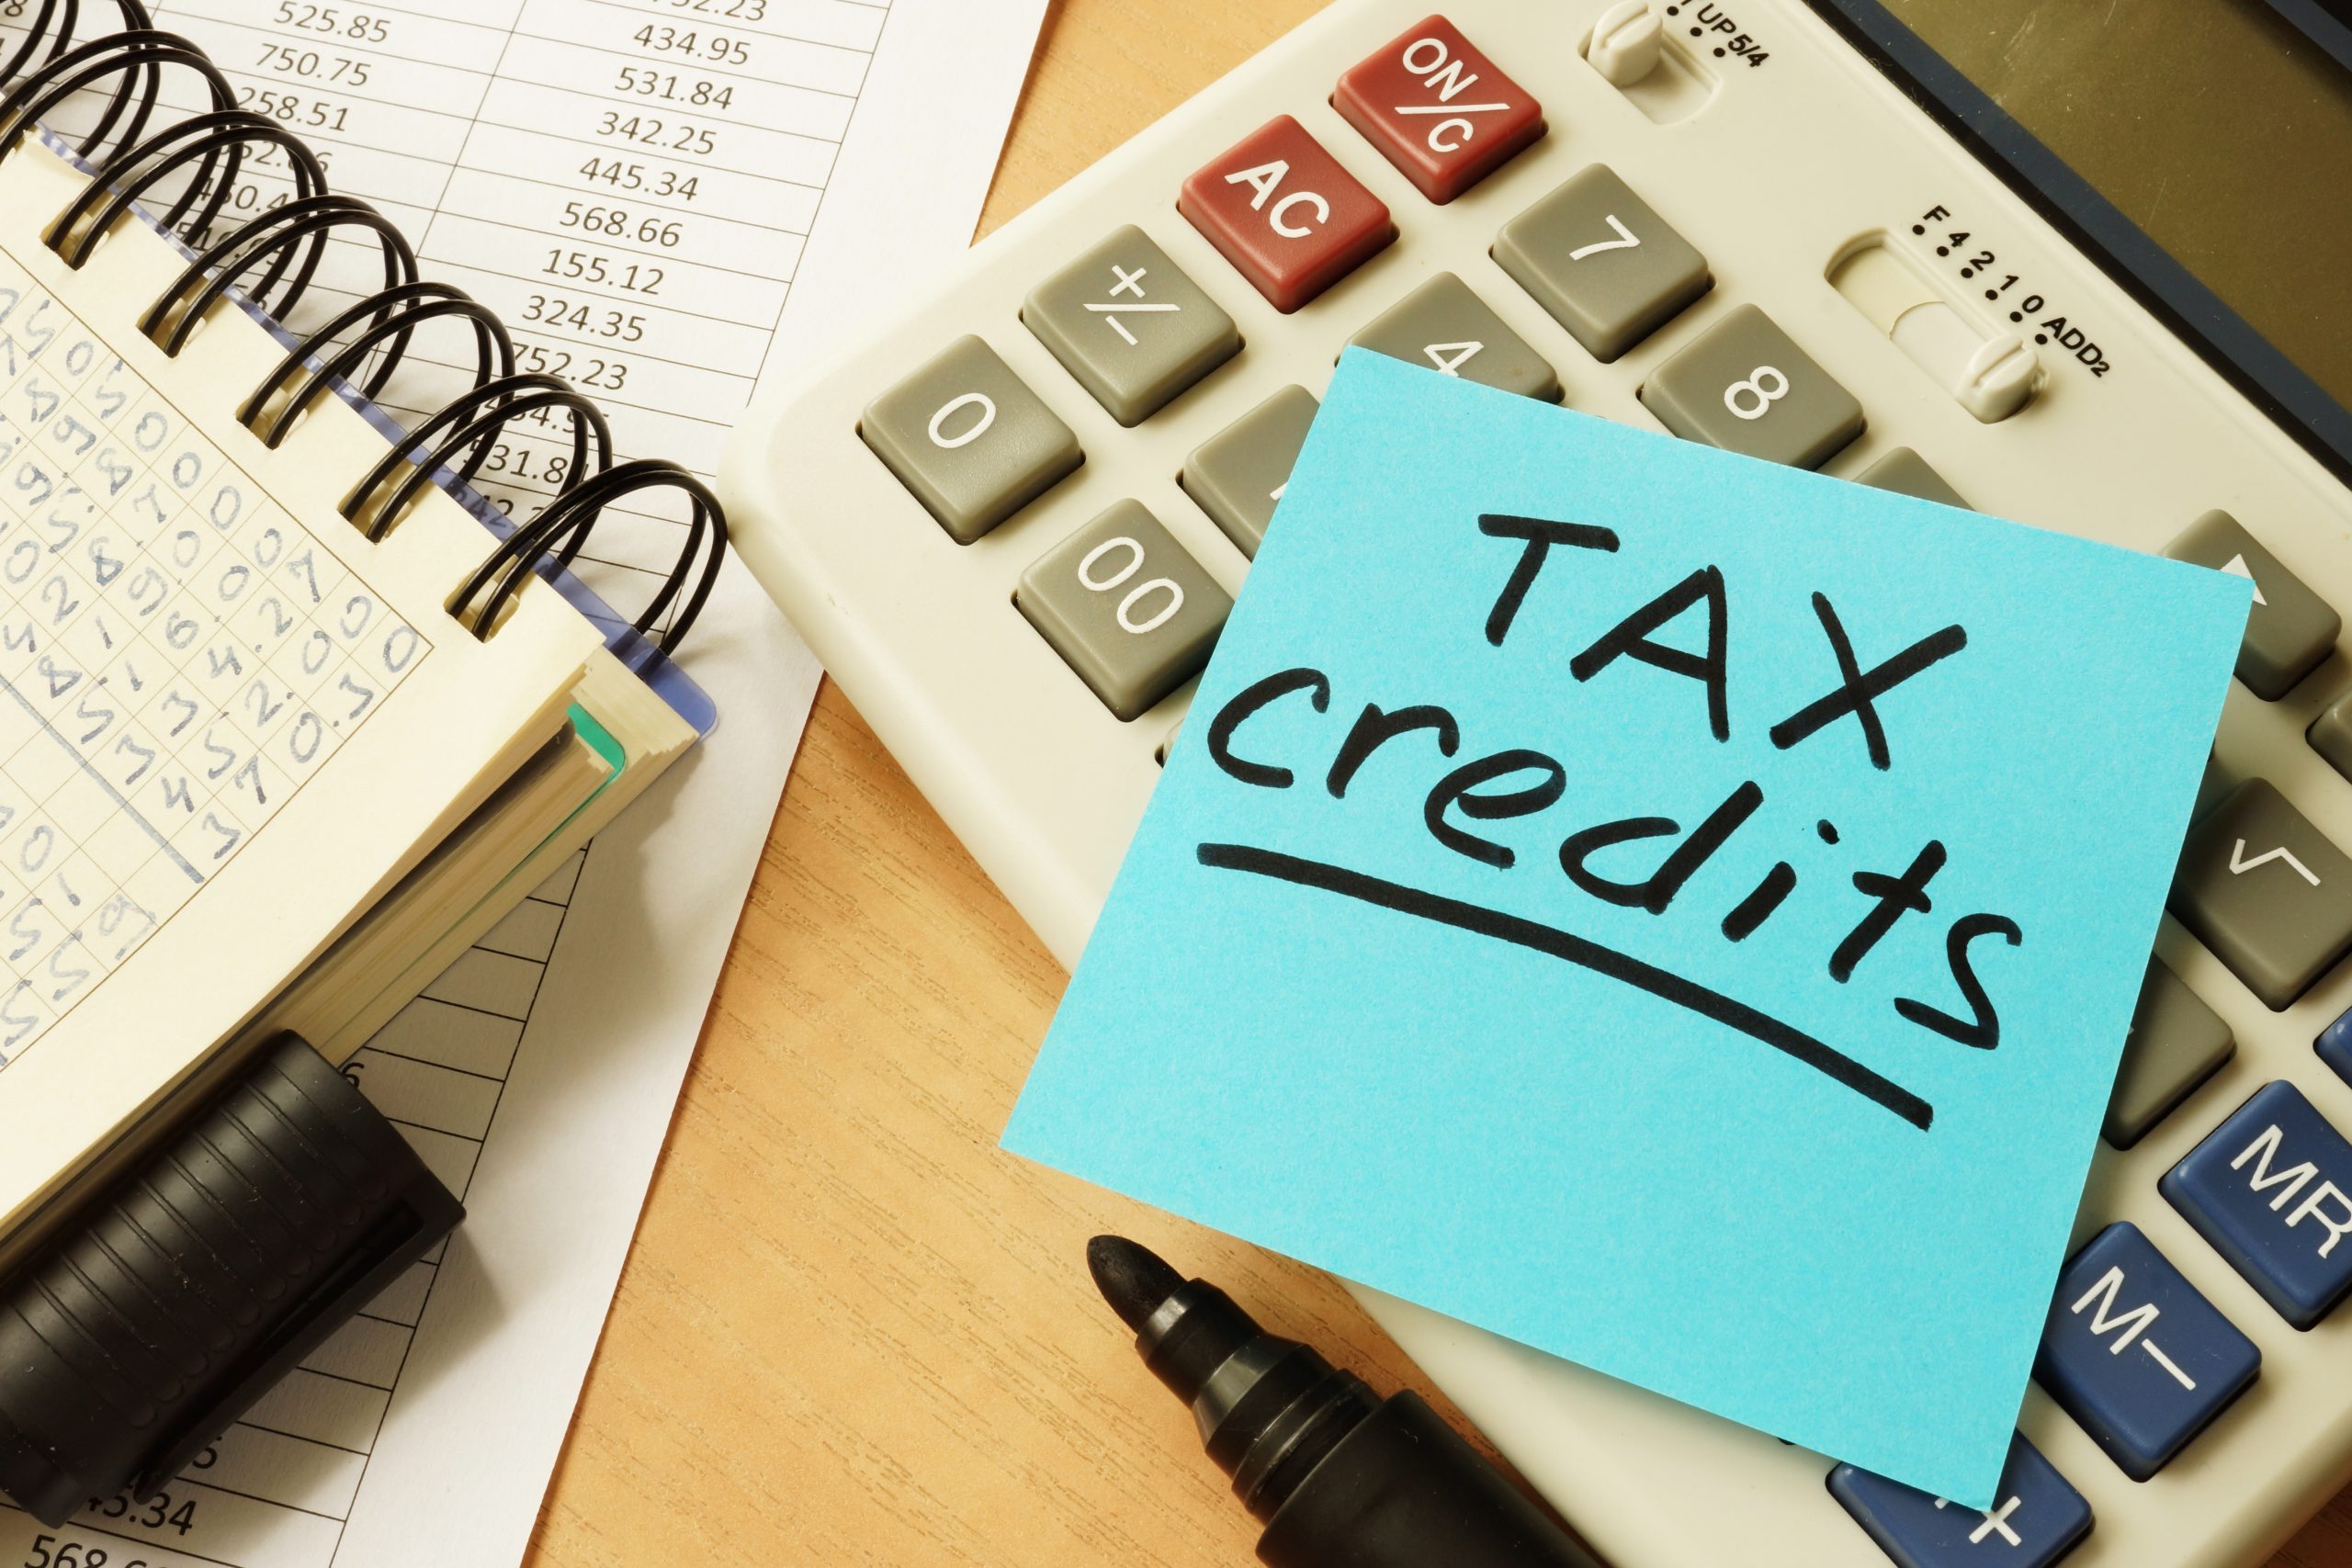 Notepad, calculator and note reading 'tax credits' depicting federal tax credits